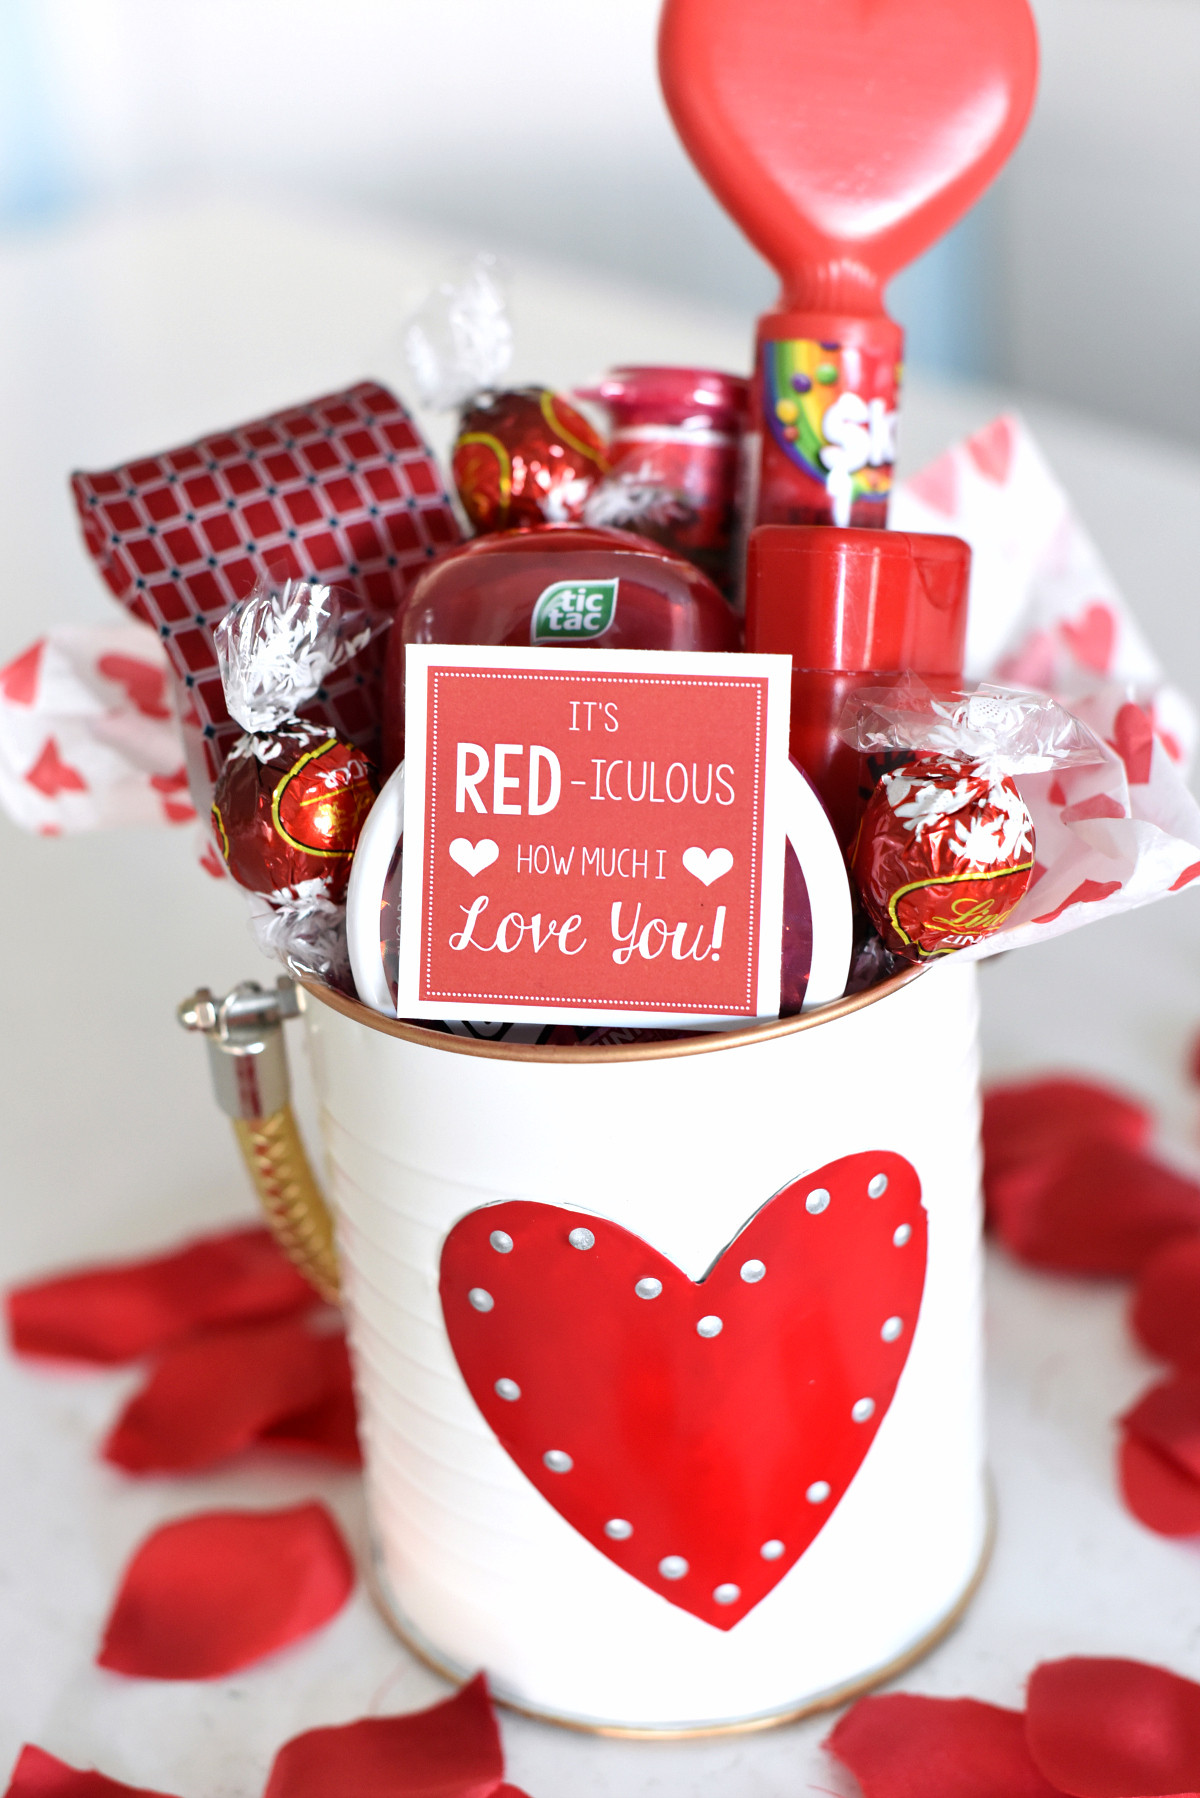 Good Valentines Day Gifts
 Cute Valentine s Day Gift Idea RED iculous Basket